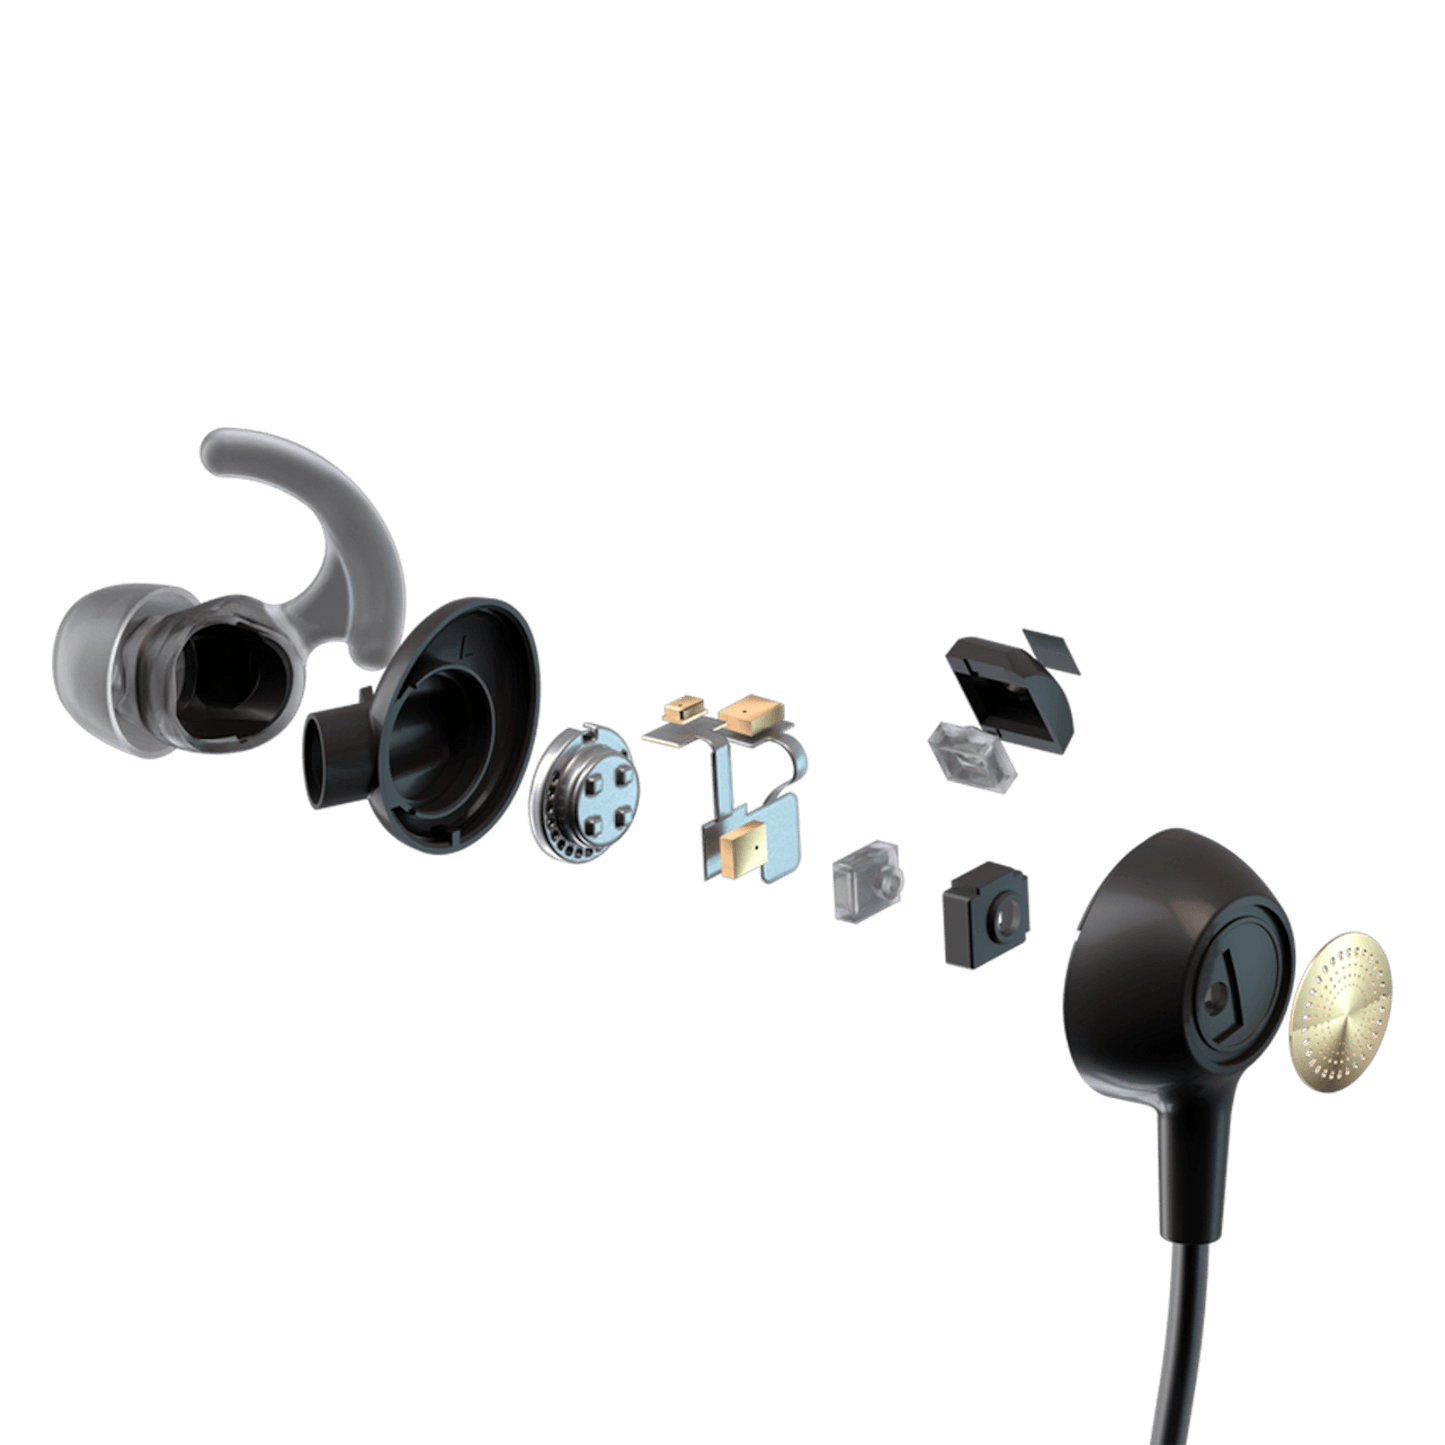 Exploded view of the Kite 2 Smart Personal Sound Amplifier earpiece